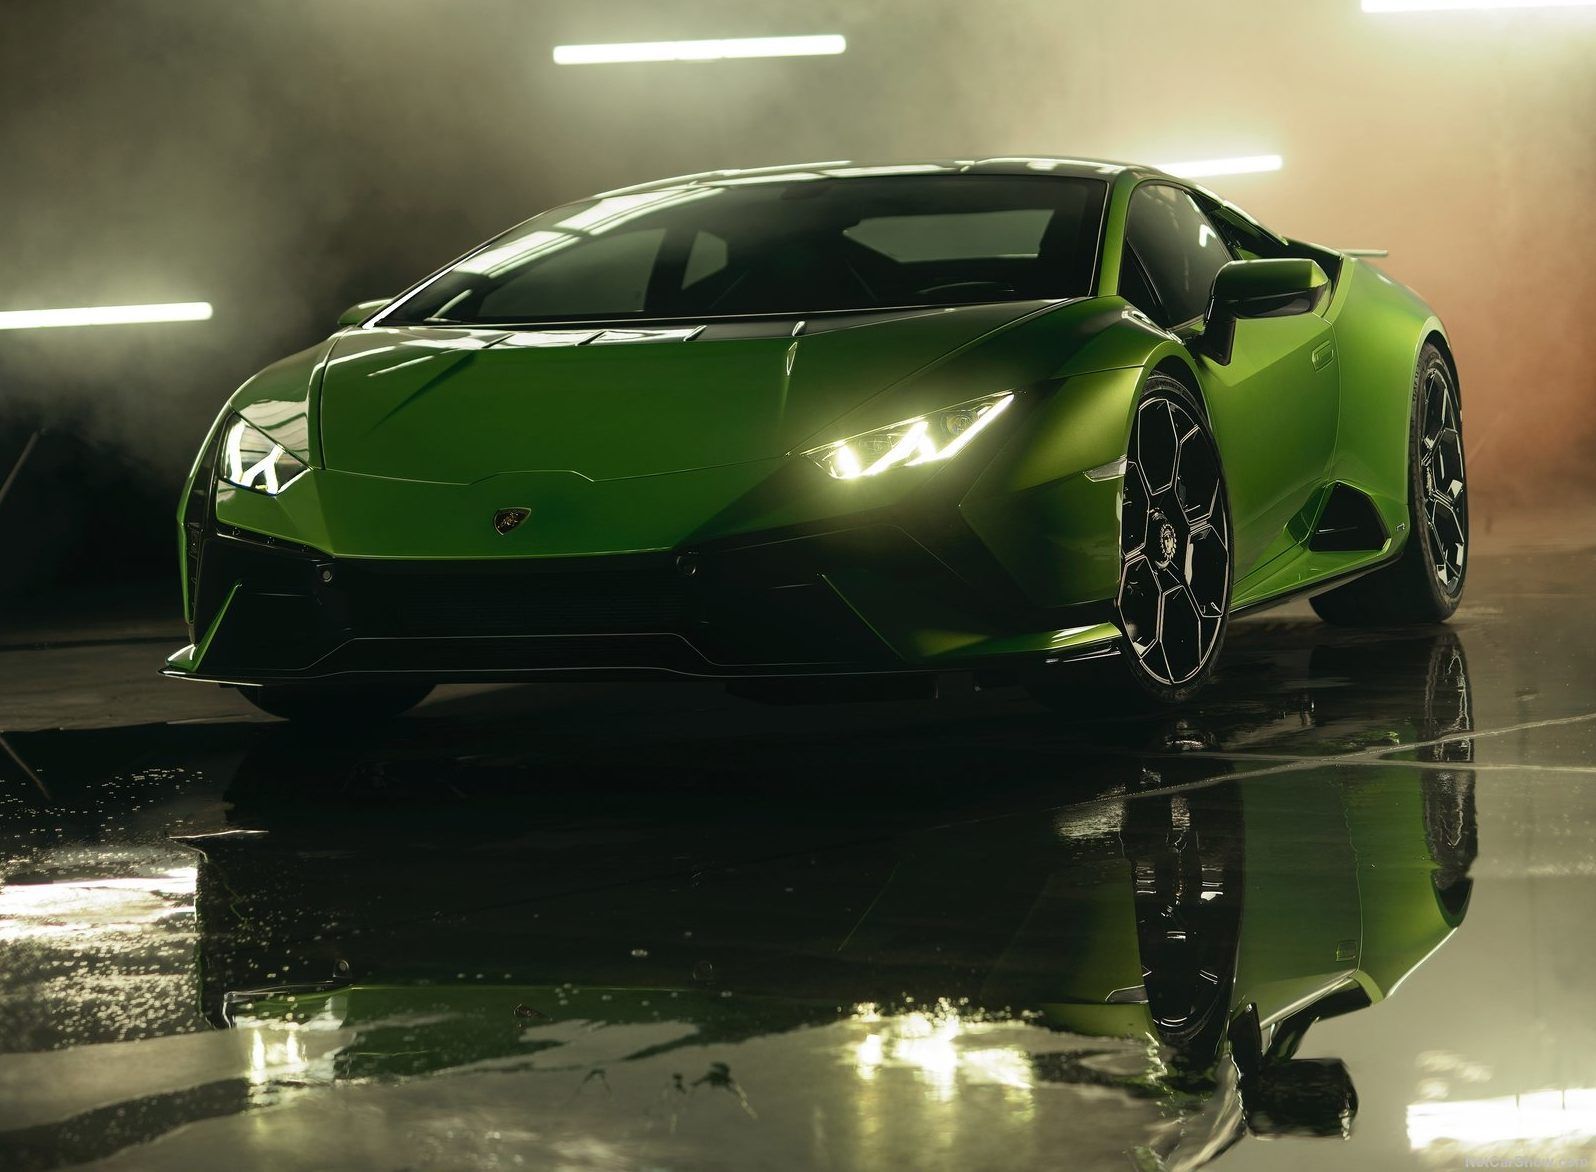 Lamborghini's 631-HP Tecnica is built for road and track